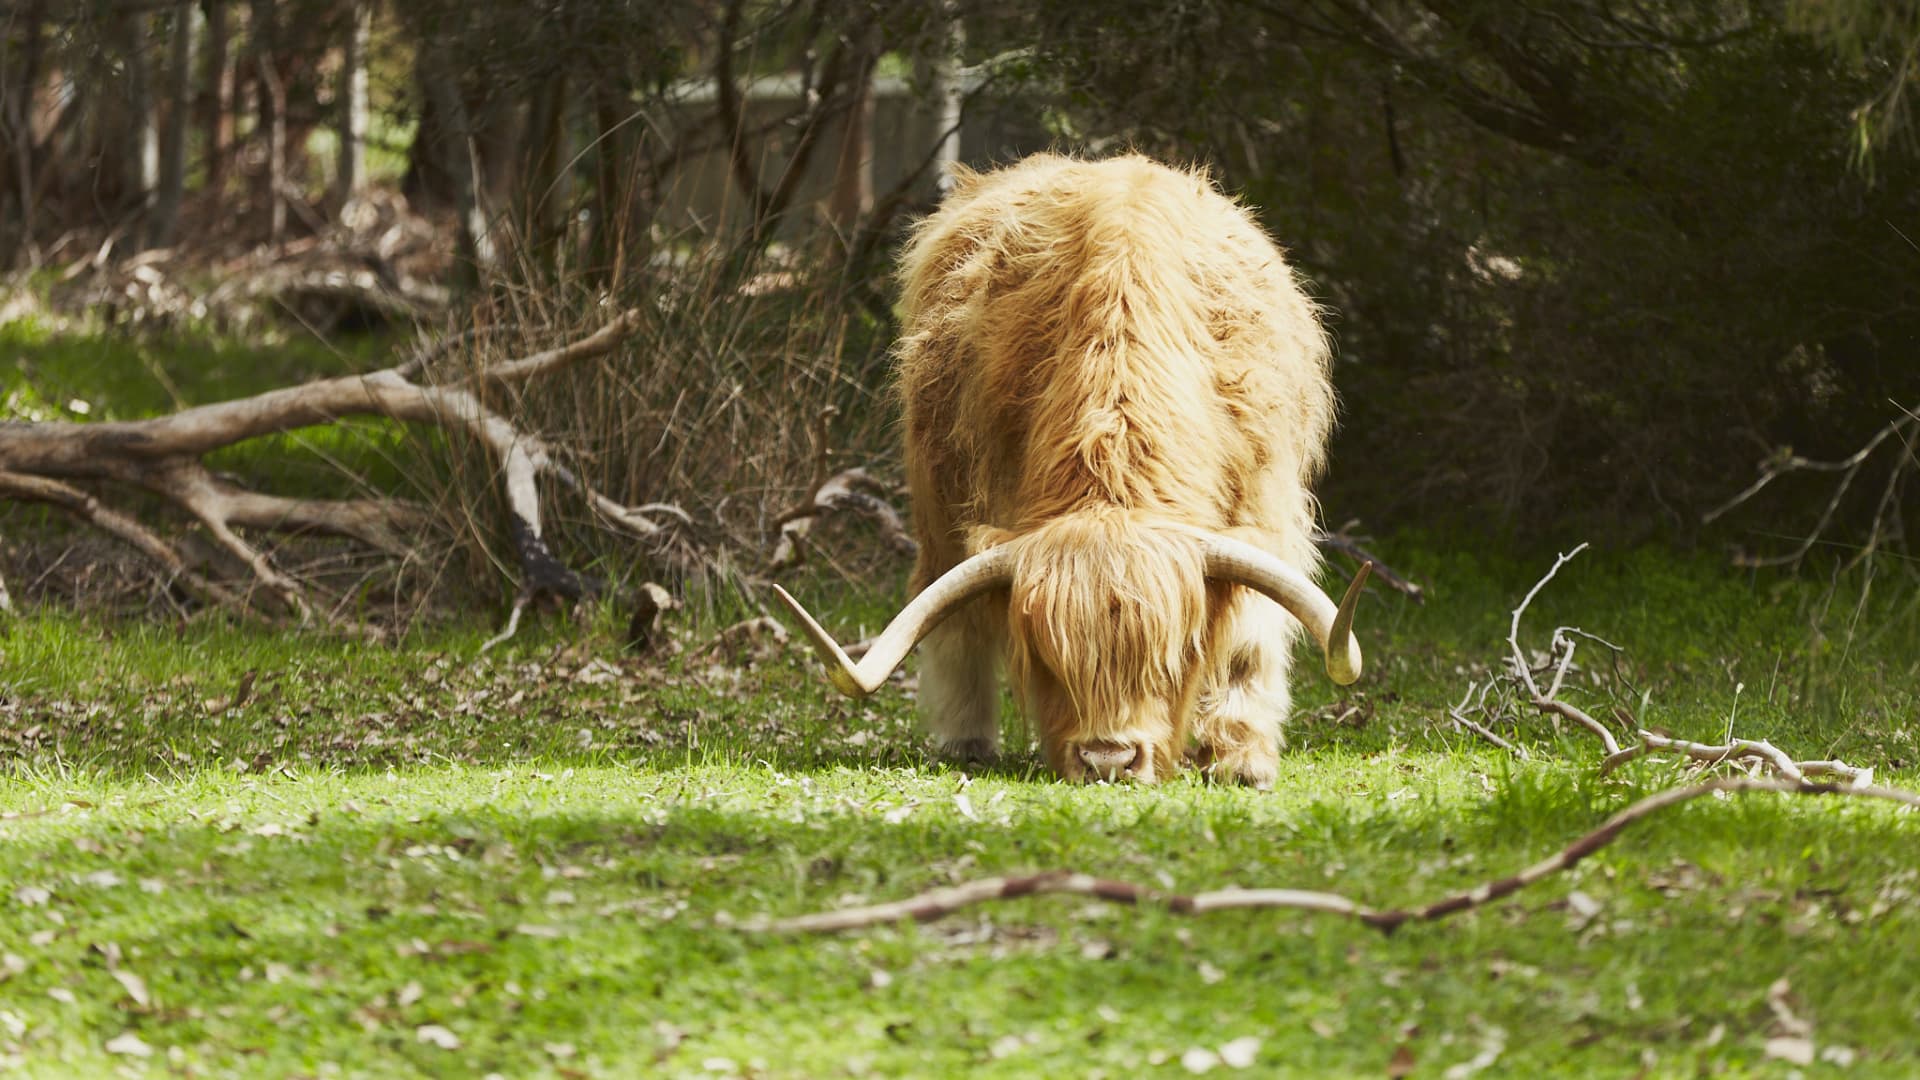 A Highland cow at Windows Estate winery.